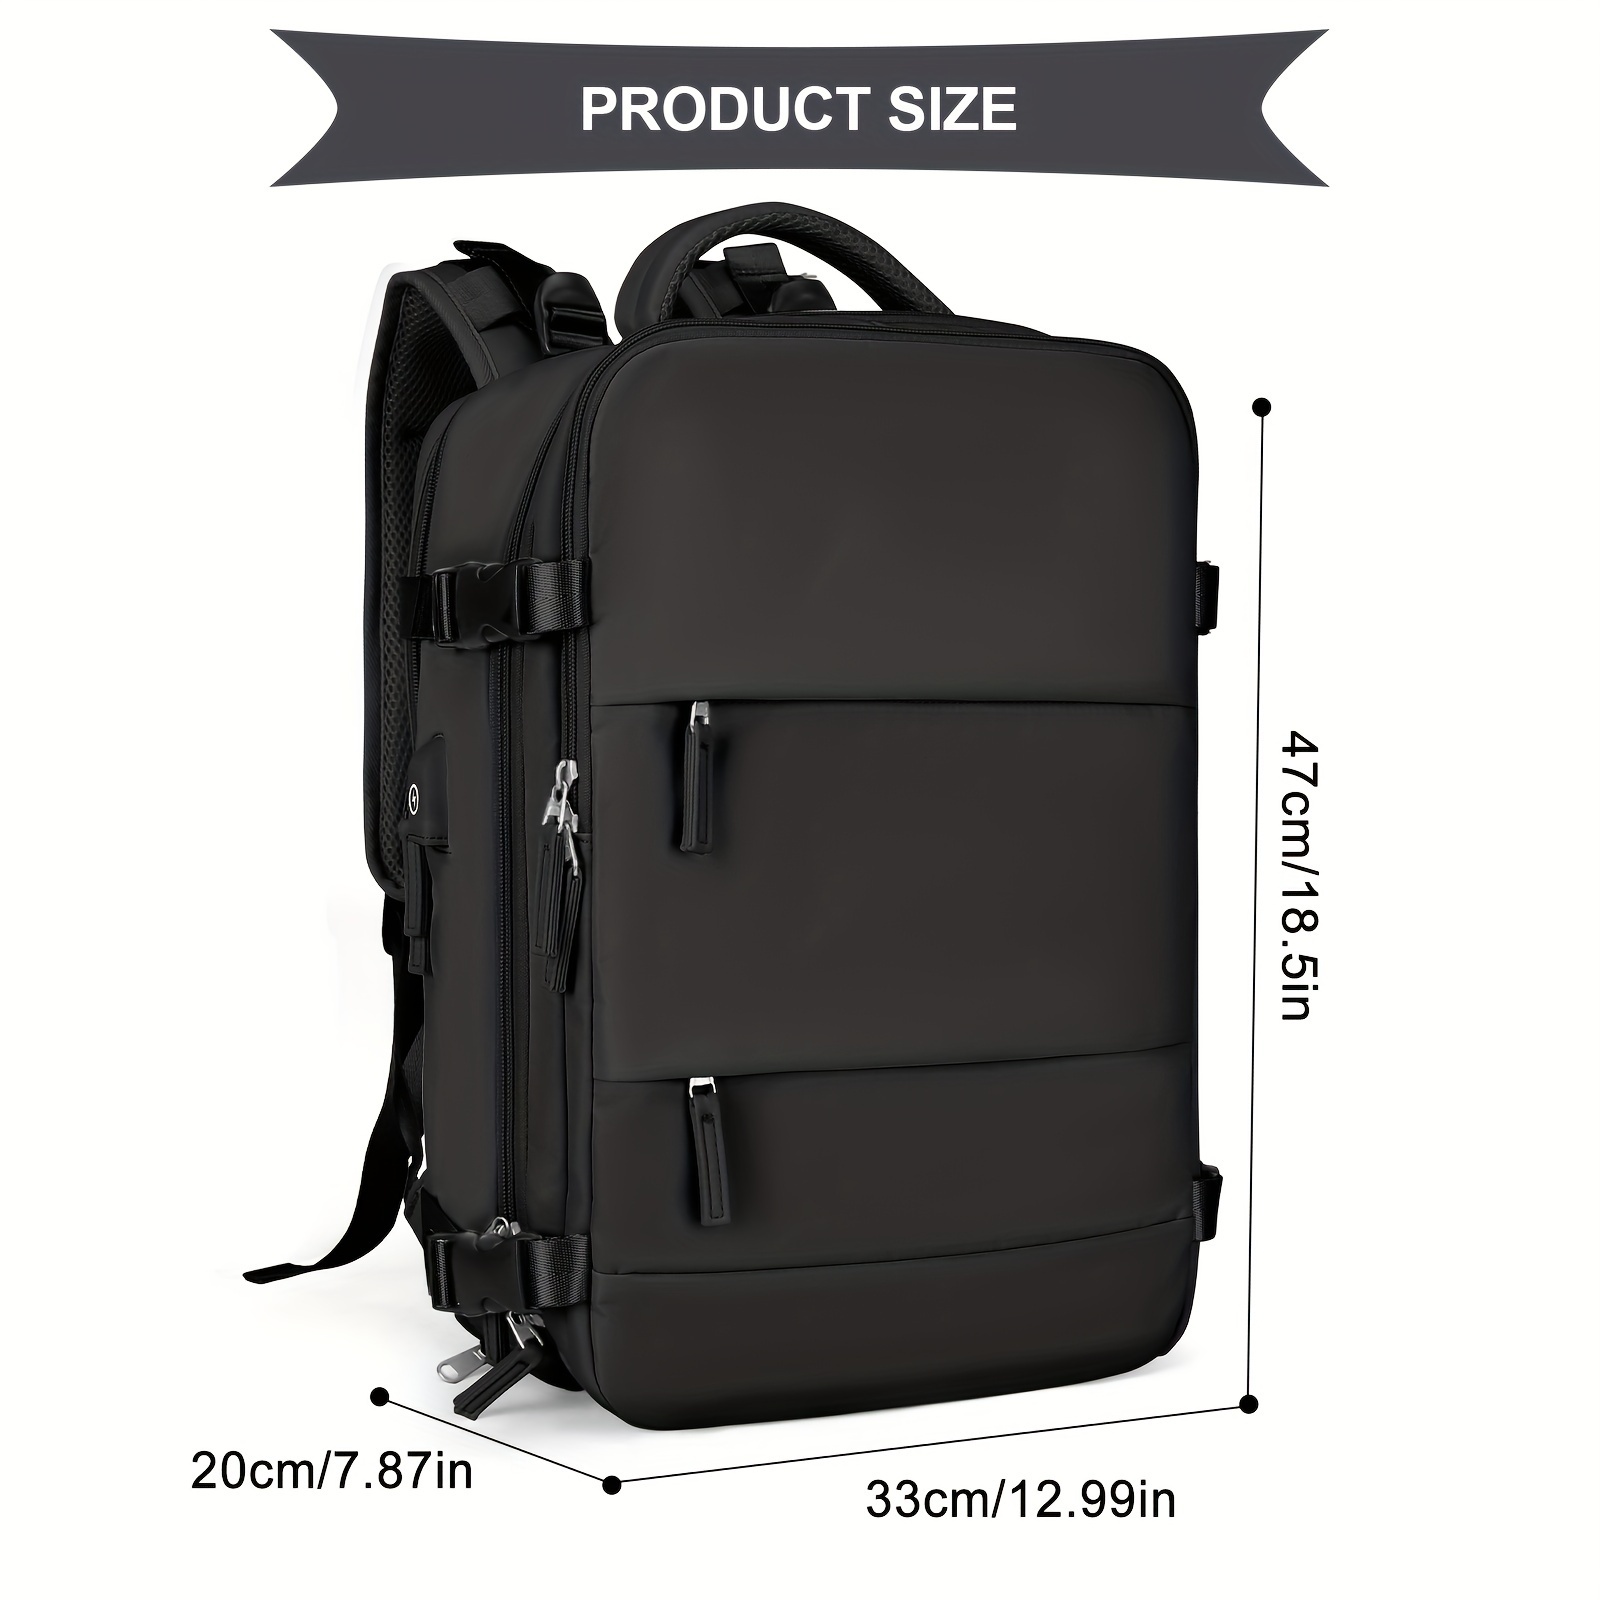 Large Travel Backpack Women, Hiking Backpack Waterproof Outdoor Sports  Rucksack School Bag Fit 15.6 Inch Laptop With Usb Charging Port Shoes  Compartme